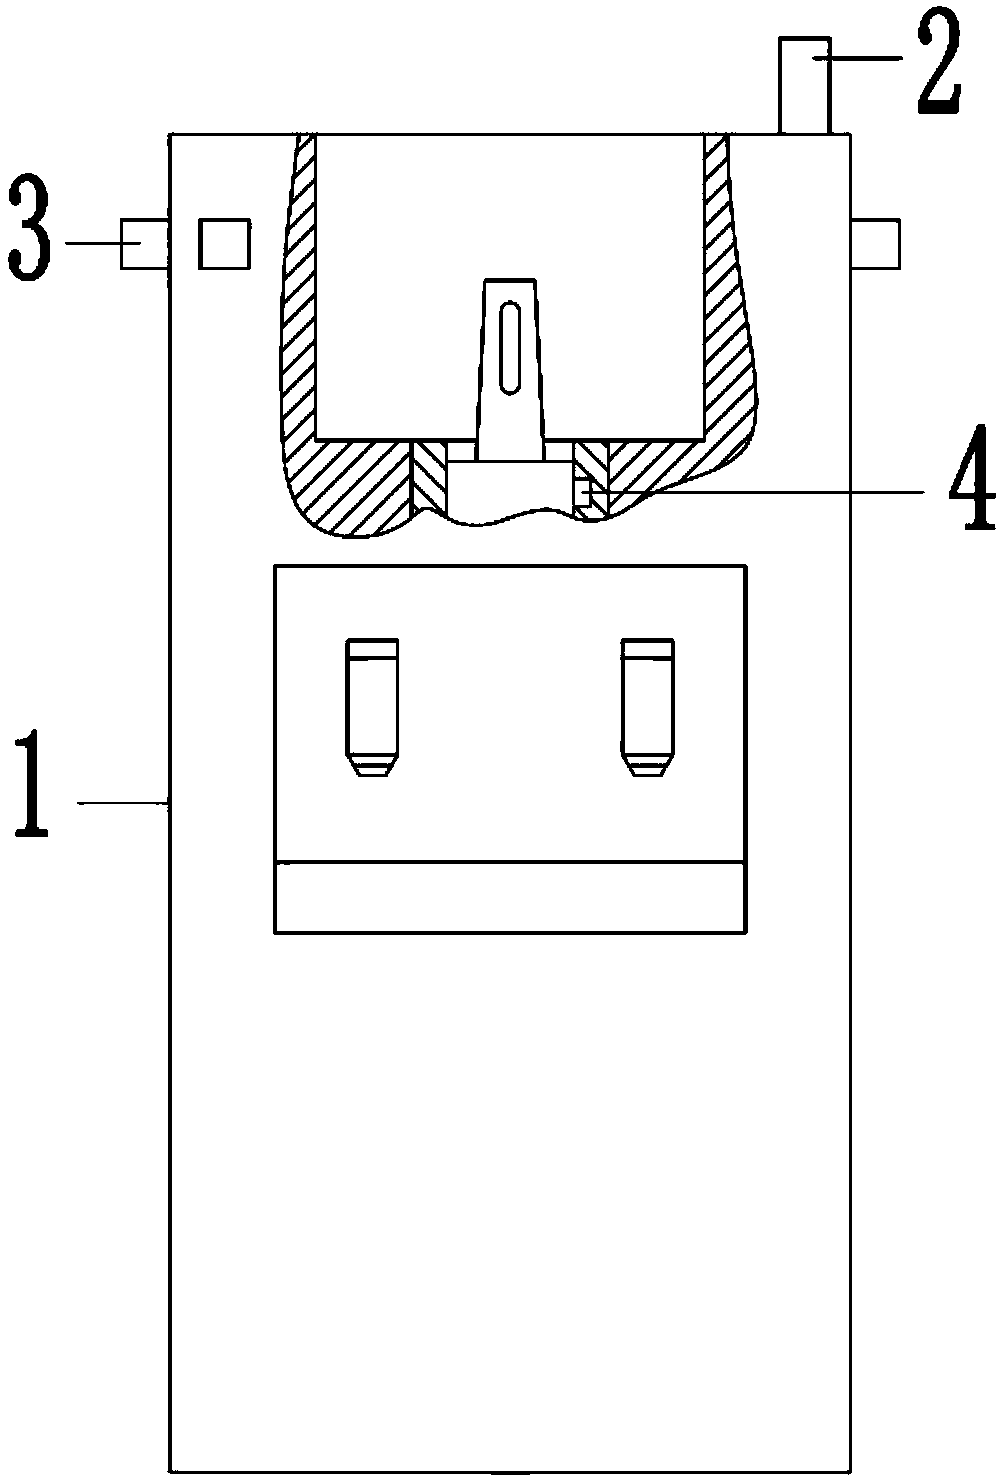 Control method and system for smart water dispenser